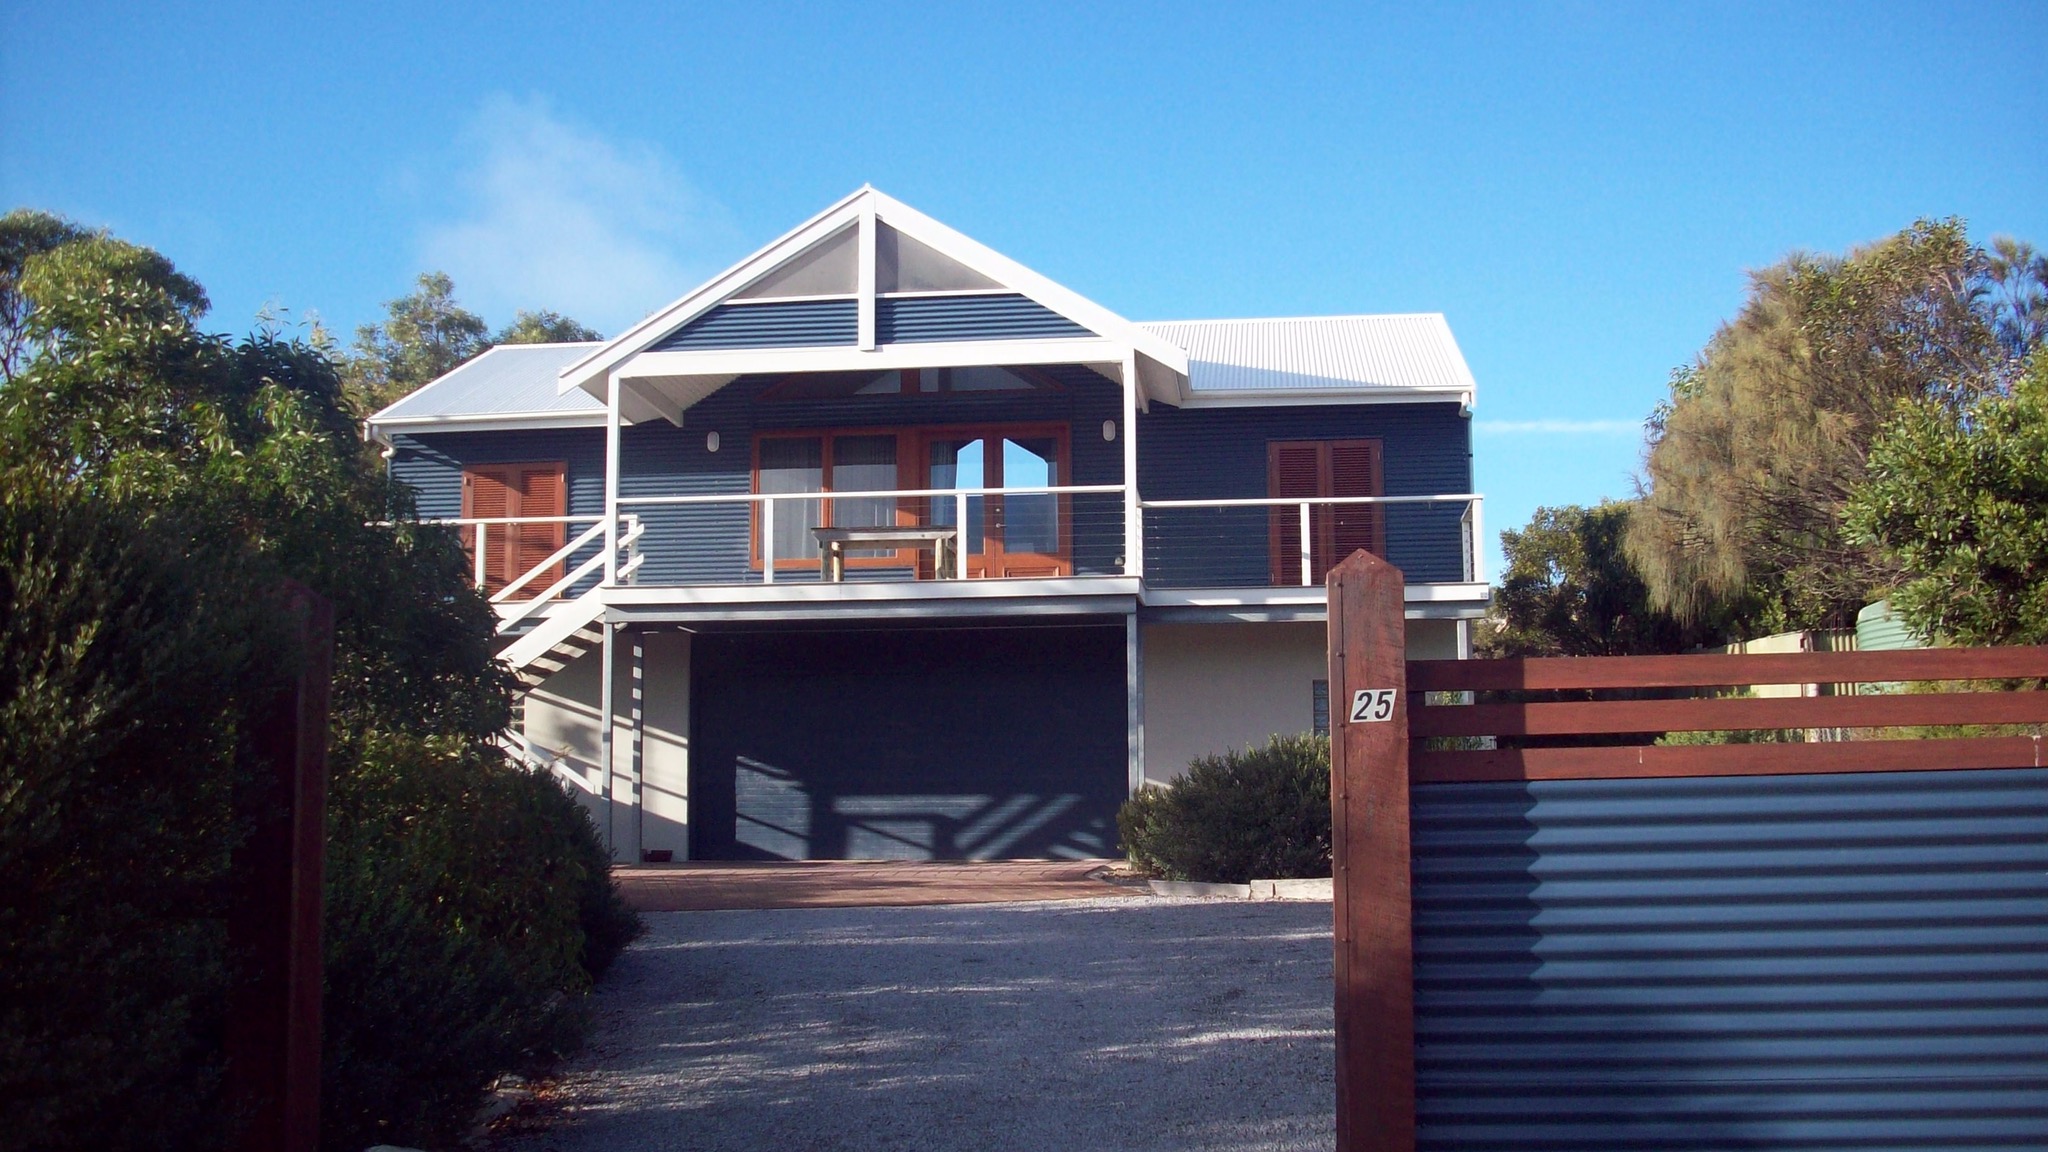 Top Deck Marion Bay - Accommodation Noosa